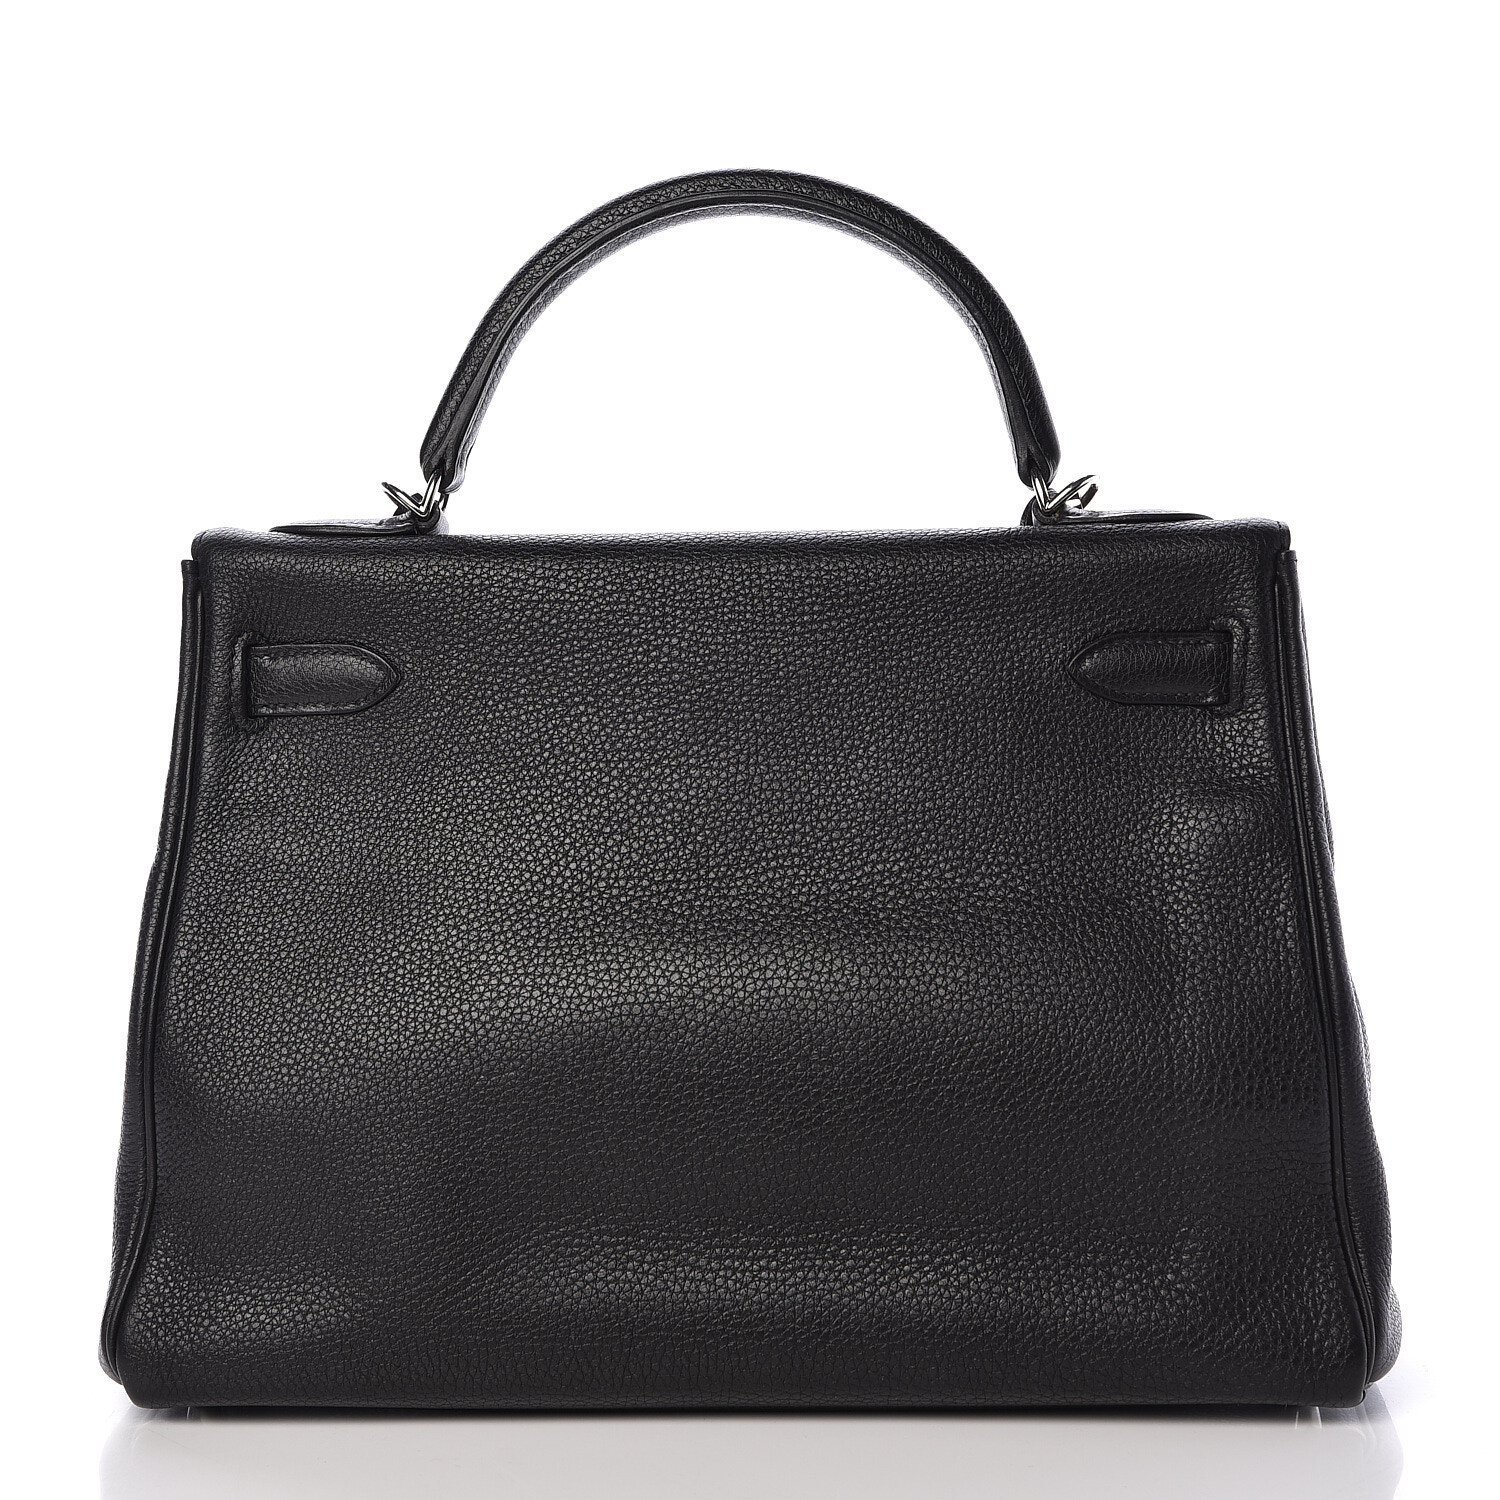 hermes-togo-kelly-retourne-32-black-available-for-sale-collecting-luxury-3.jpg